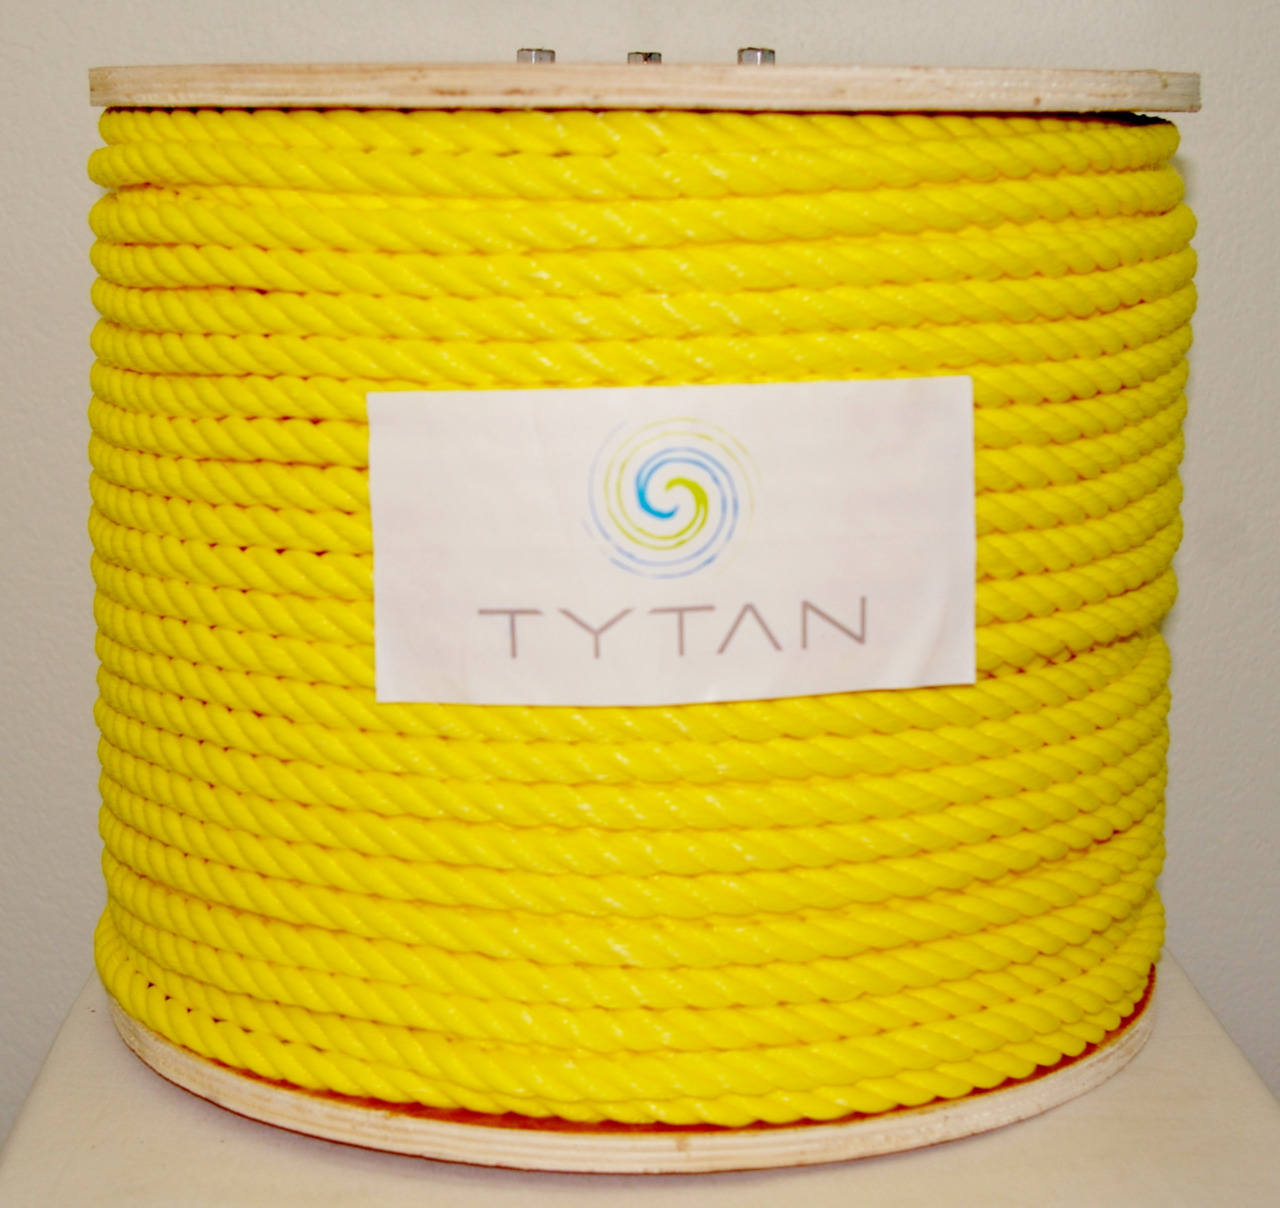 Tytan 5/8 x 600' Yellow Poly Rope